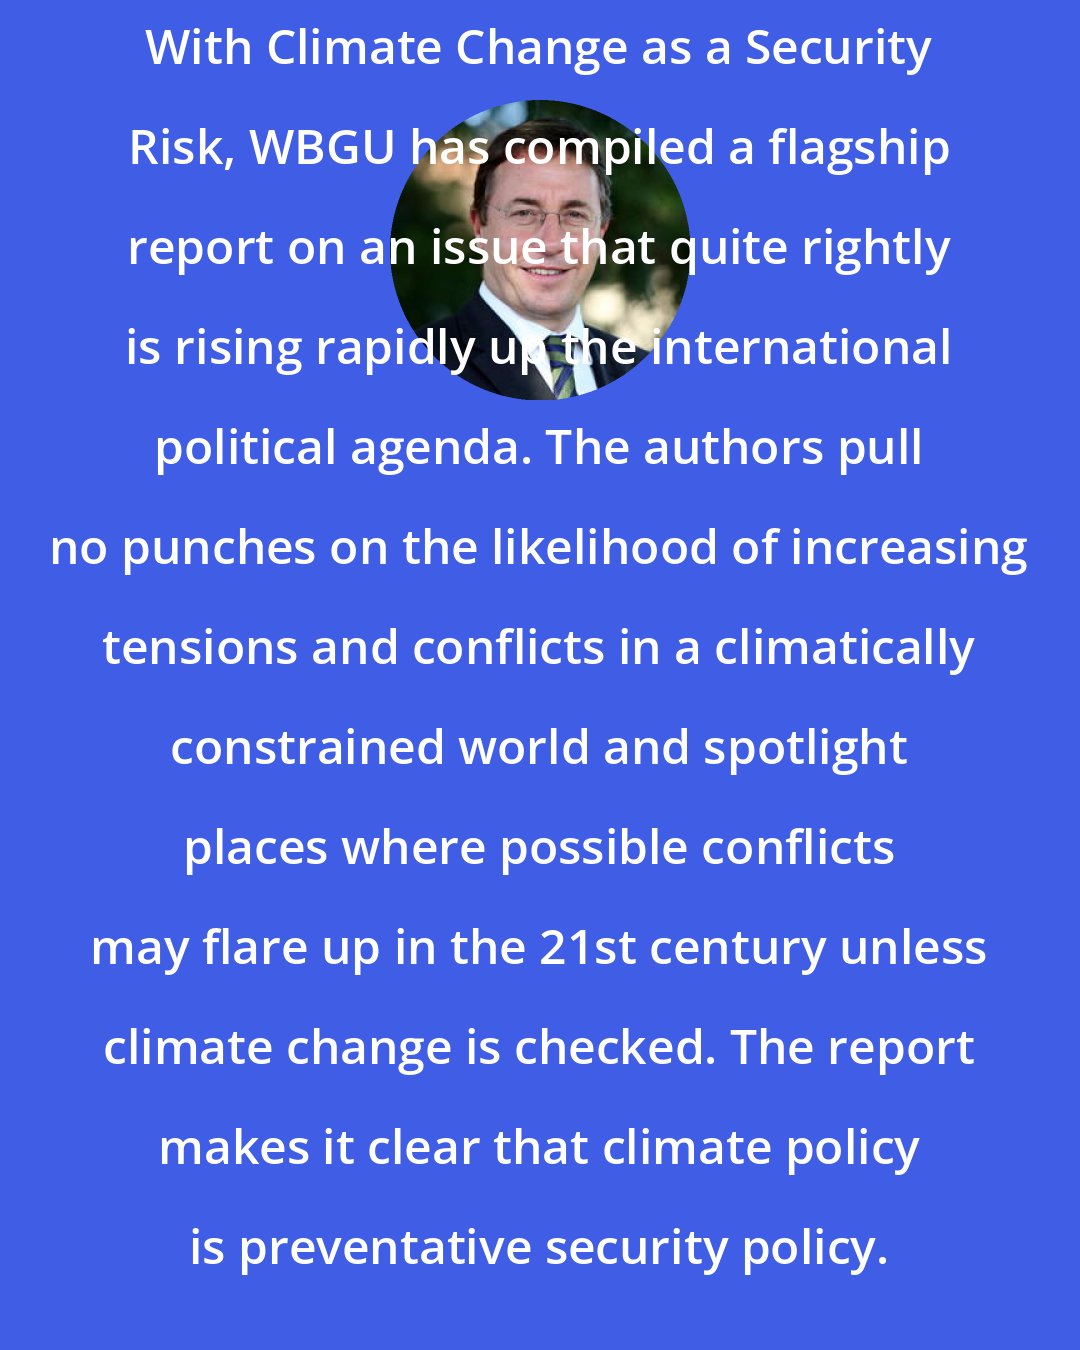 Achim Steiner: With Climate Change as a Security Risk, WBGU has compiled a flagship report on an issue that quite rightly is rising rapidly up the international political agenda. The authors pull no punches on the likelihood of increasing tensions and conflicts in a climatically constrained world and spotlight places where possible conflicts may flare up in the 21st century unless climate change is checked. The report makes it clear that climate policy is preventative security policy.